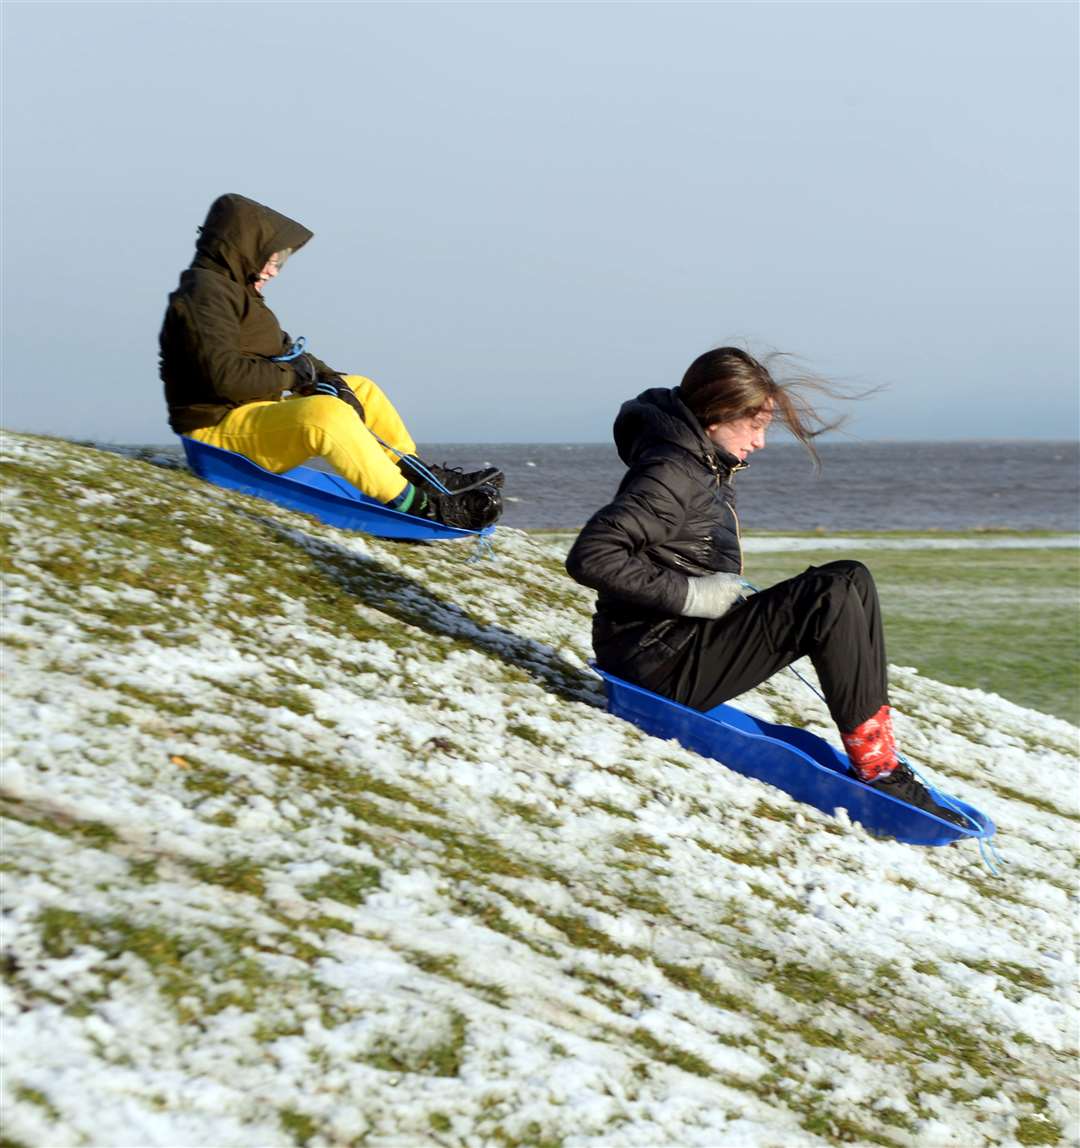 Josh (11) and Lana (12) Campbell on Gallow Hill, Tain Links. Picture: James Mackenzie.